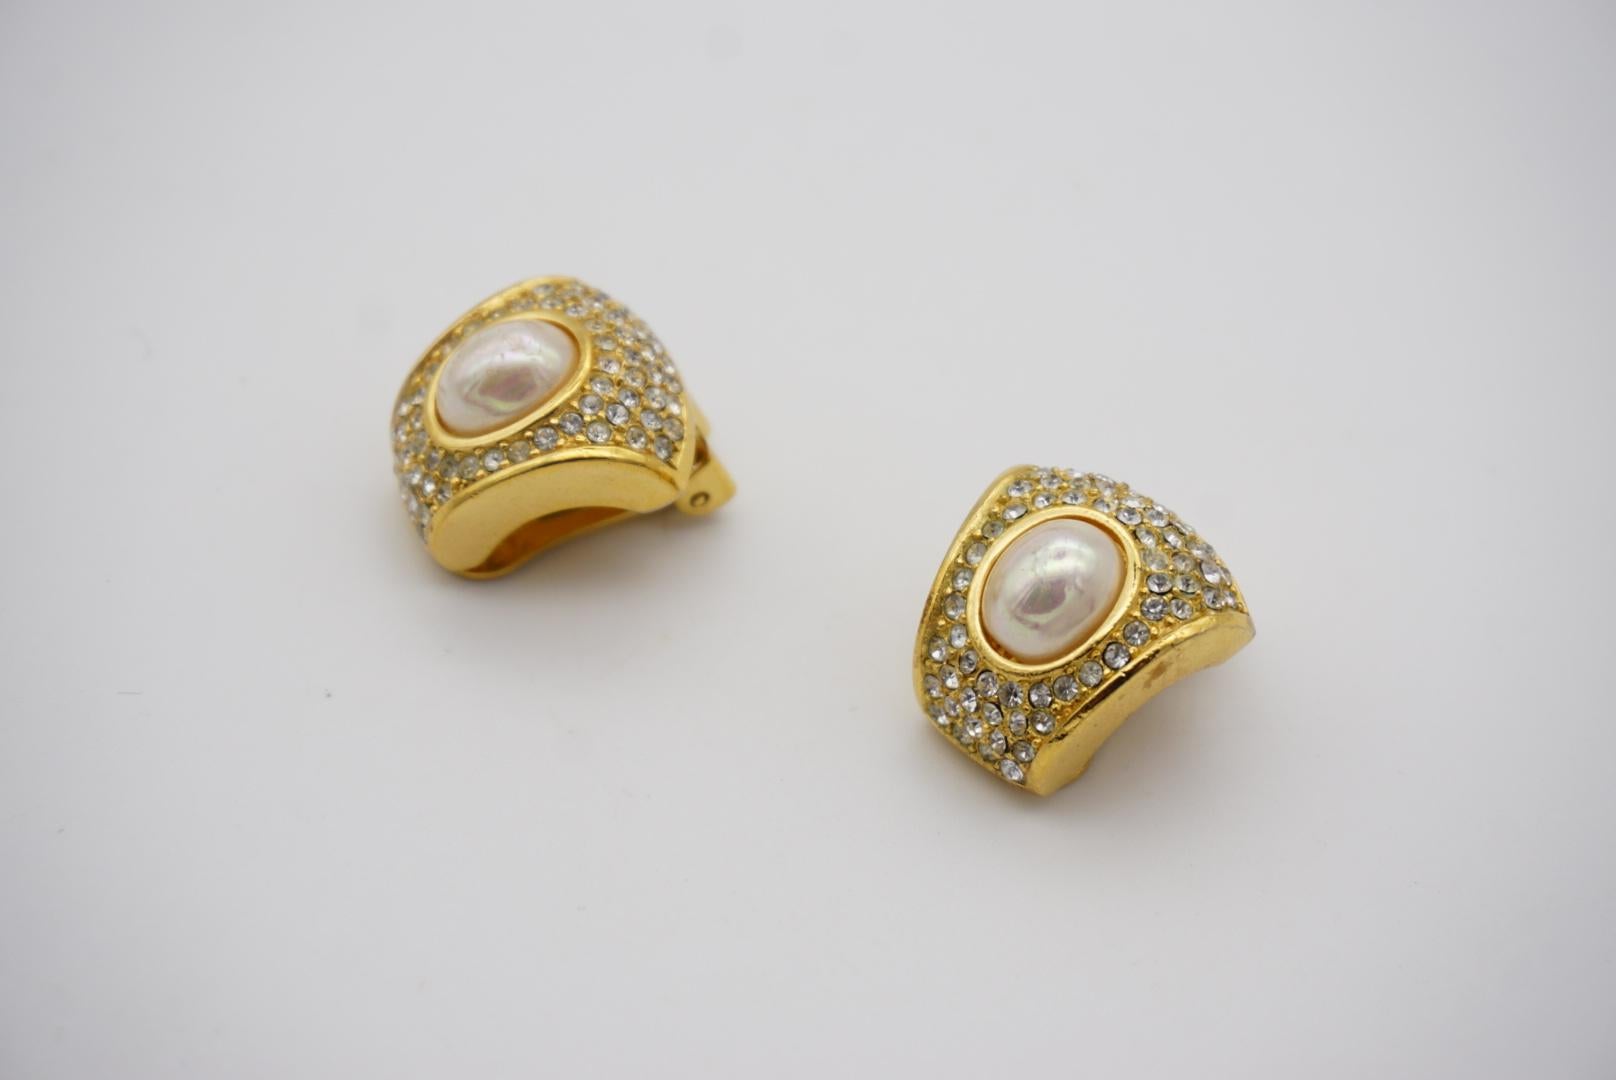 Christian Dior Vintage 1980s White Oval Pearl Crystals Fan Gold Clip Earrings For Sale 5